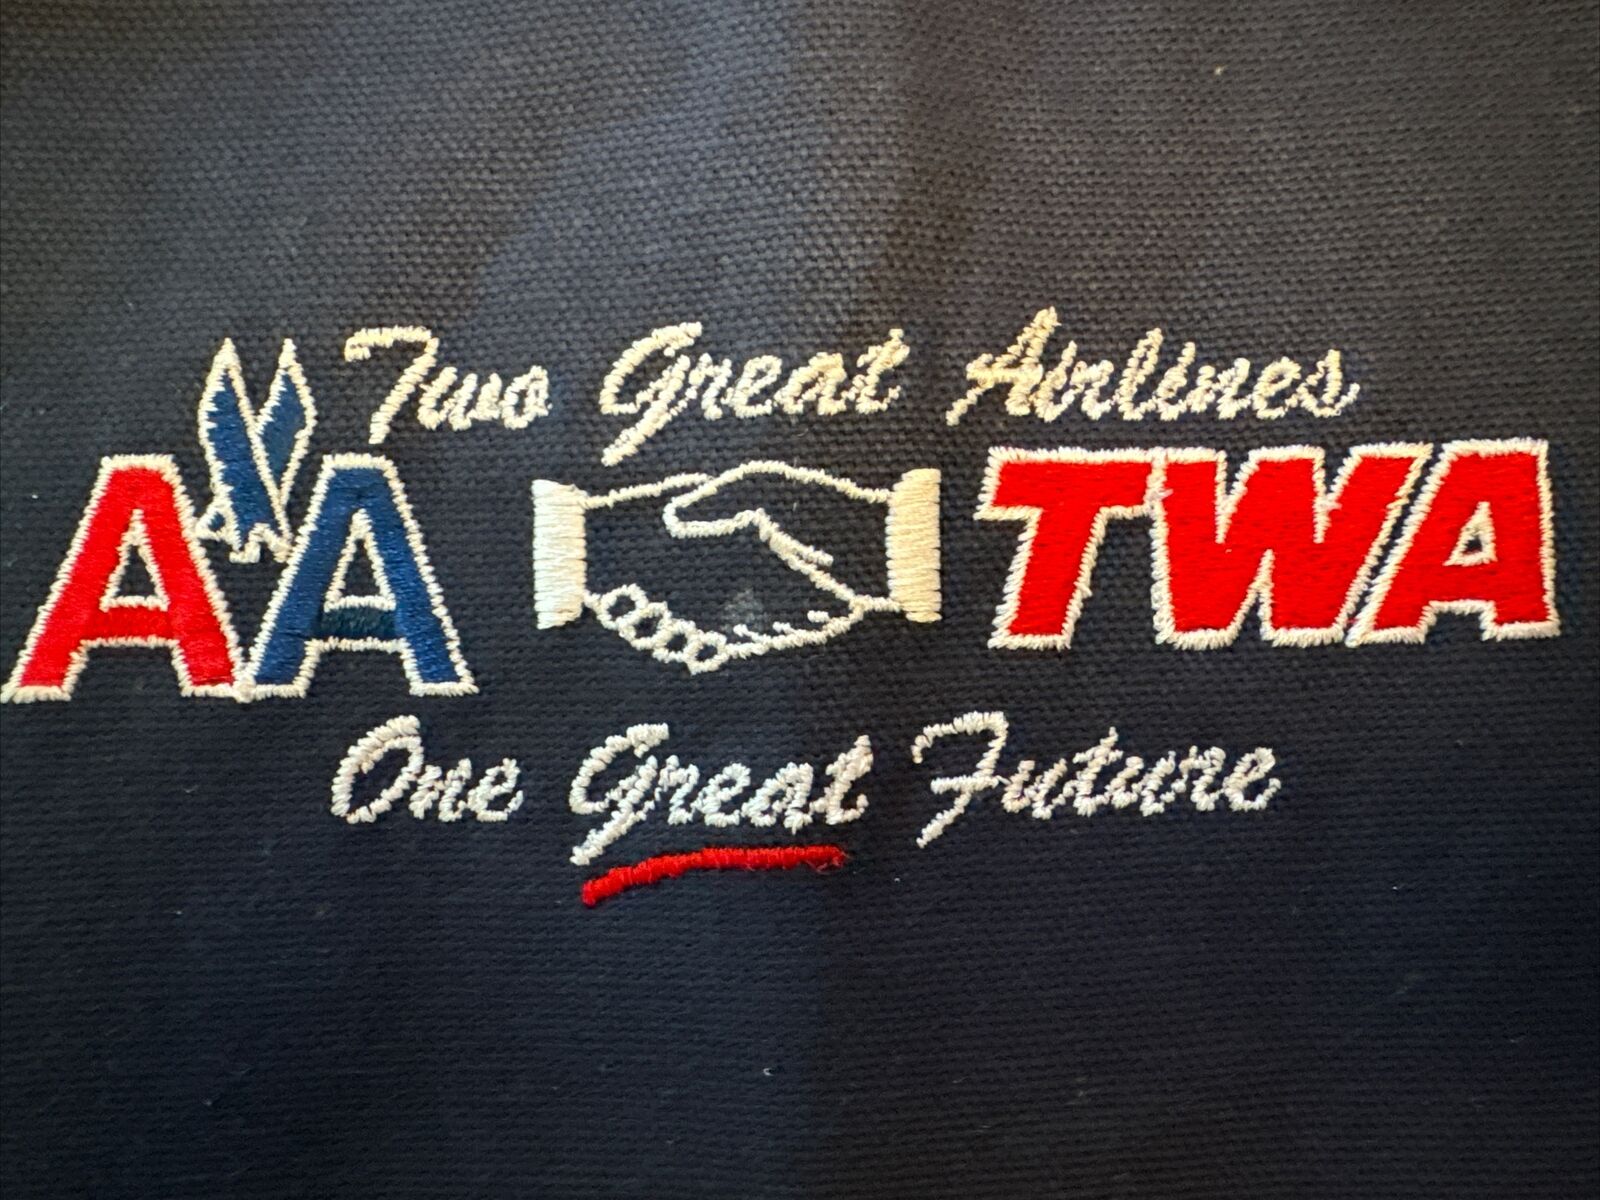 Vintage 2001 AA  American Airlines TWA Trans World Airlines Merger Tote Bag